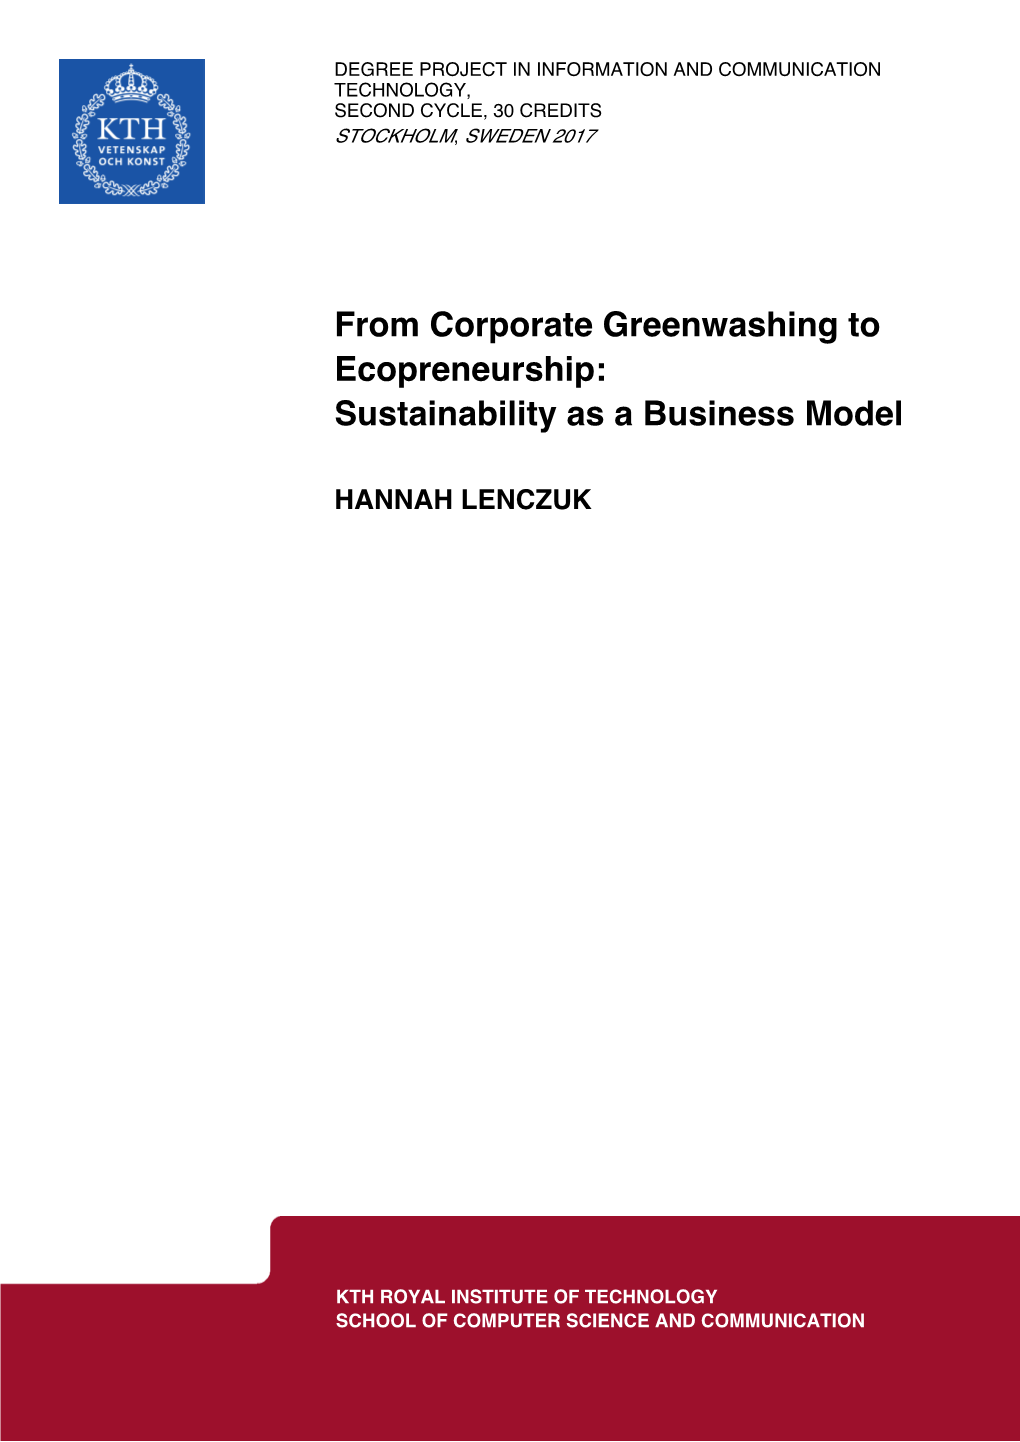 From Corporate Greenwashing to Ecopreneurship: Sustainability As a Business Model